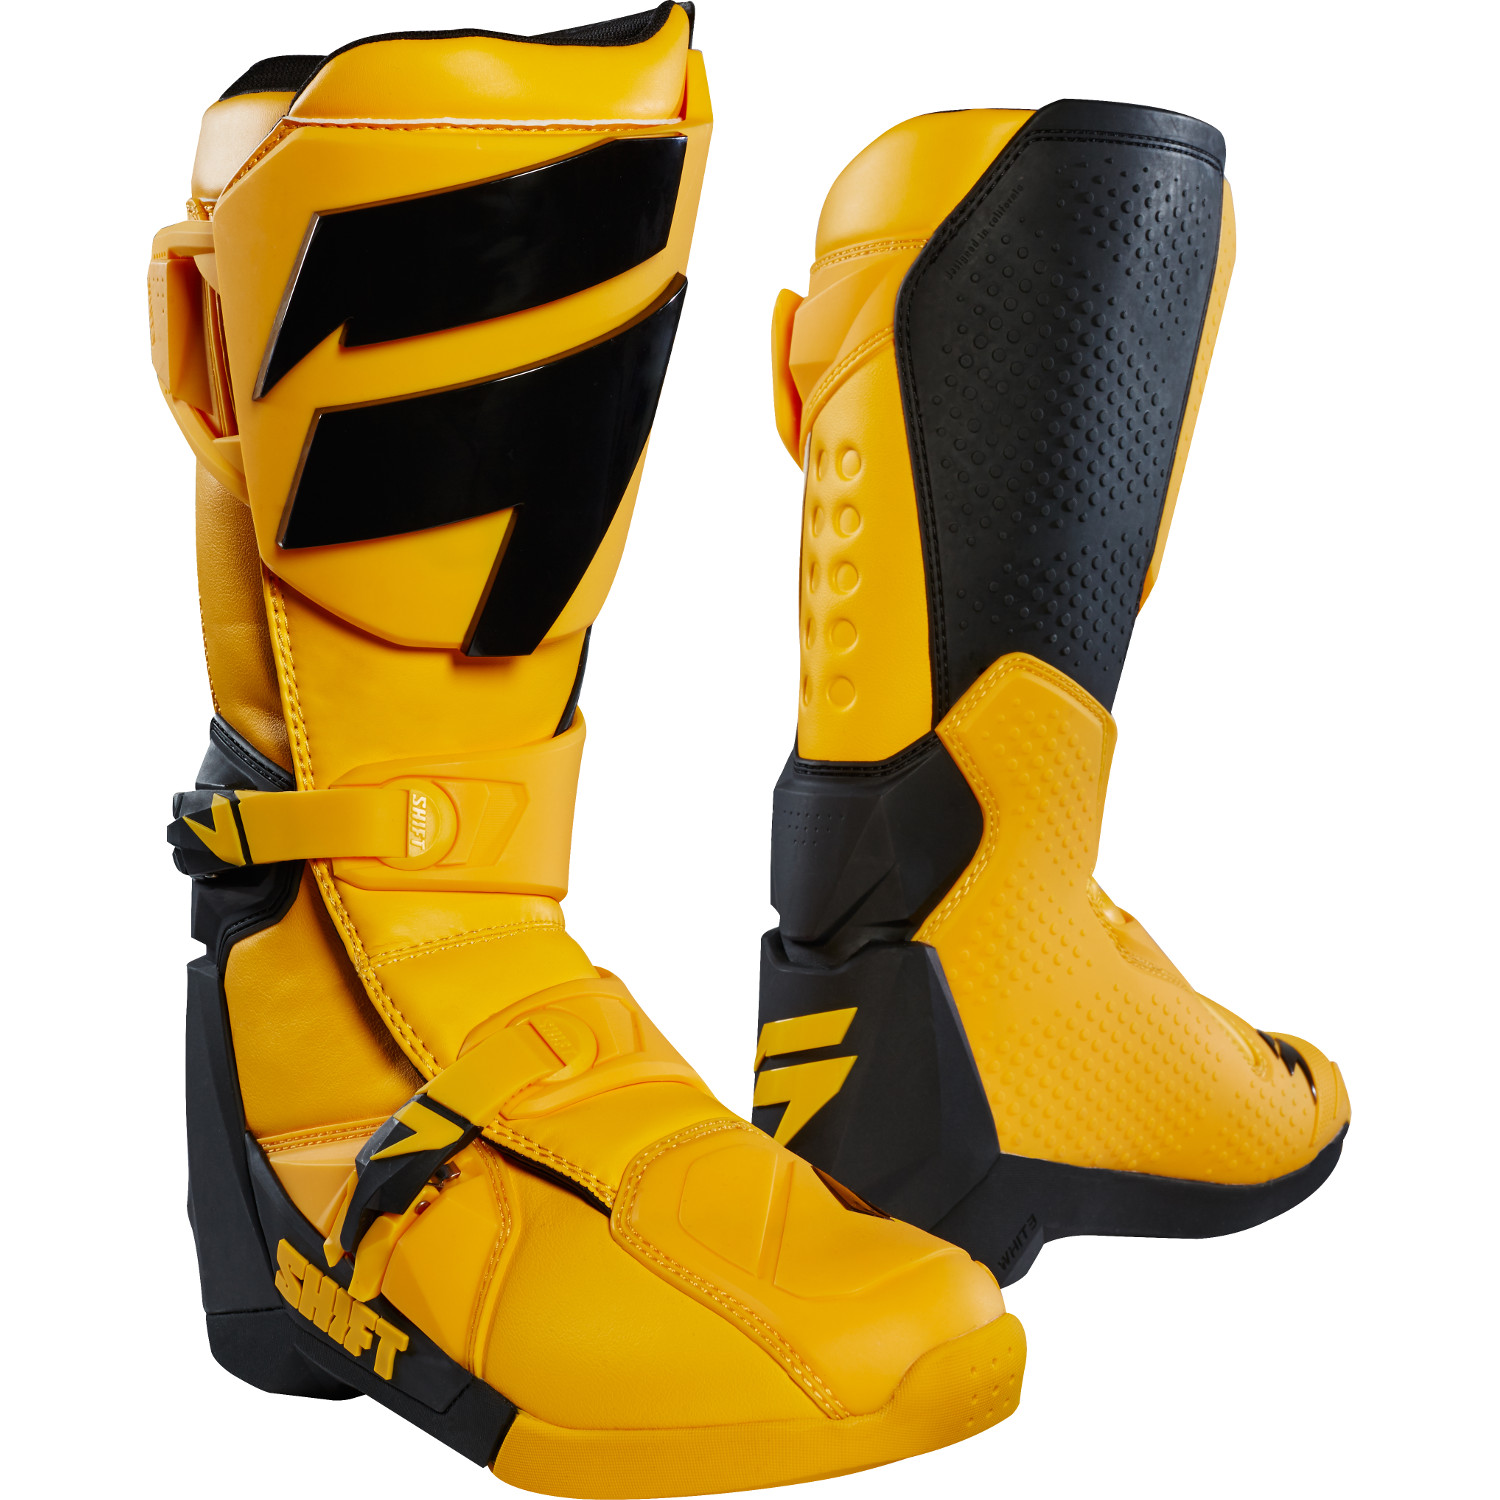 Shift MX Boots Whit3 Yellow